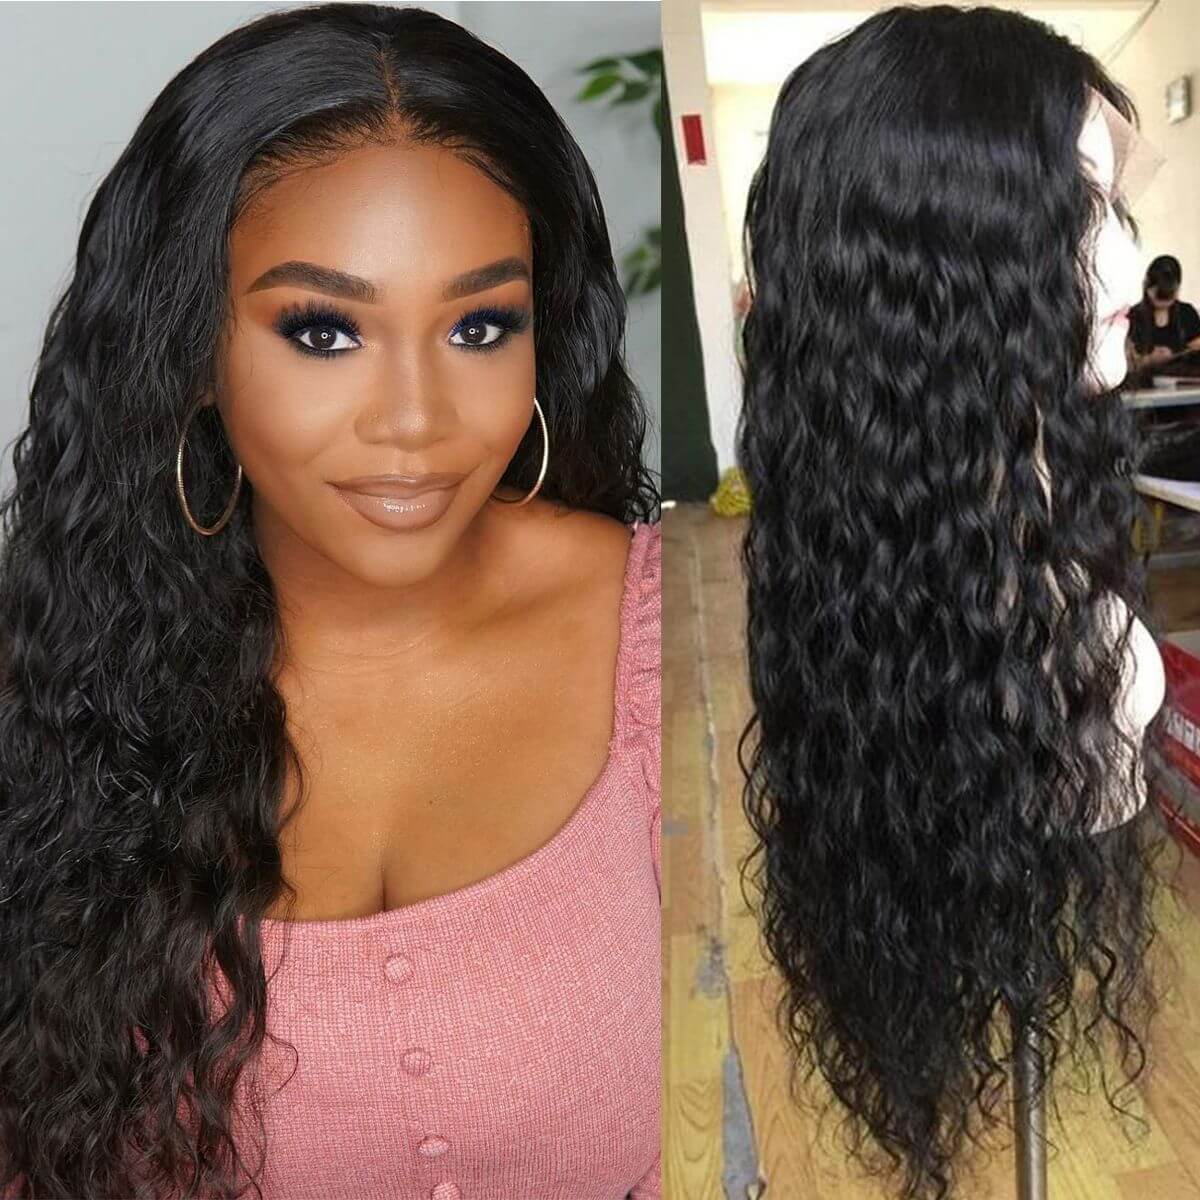 360 water wave wig,360 water lace wig,360 water wave frontal wigs,water wave 360 lace frontal wigs,water wave lace front wig,360 lace front wig,wet and wavy 360 front wig